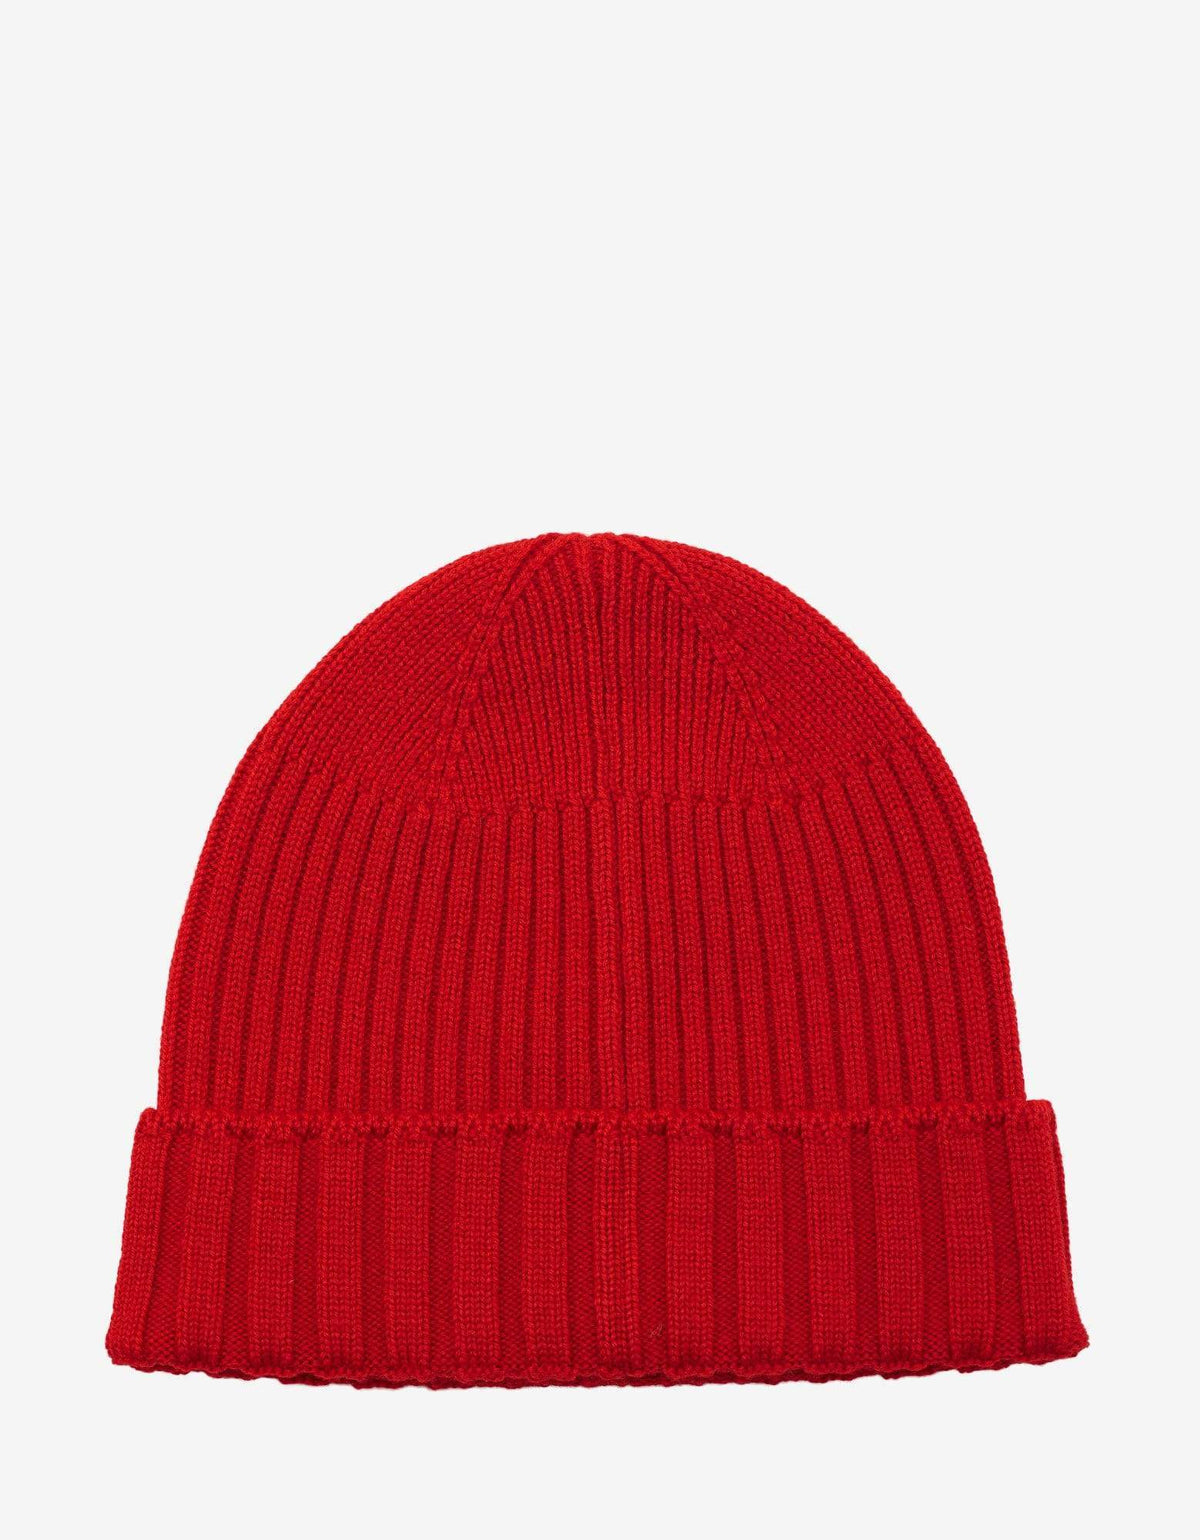 Versace Red Ribbed Wool Beanie Hat